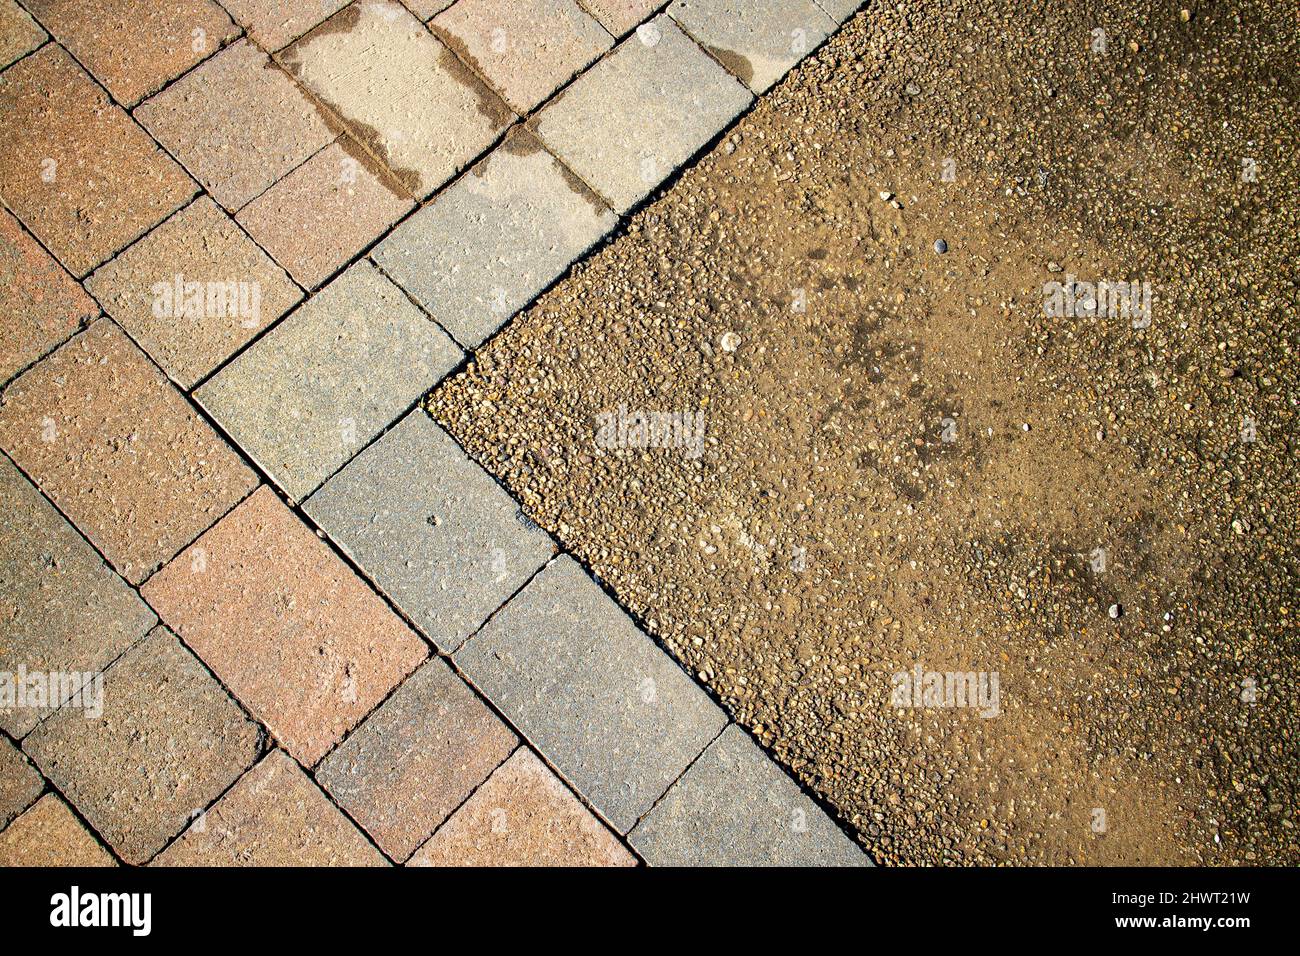 Epsom Surrey UK, March 07 2022, Block Paving Sidewalk With Gravel Close Up Looking Down With No People Stock Photo